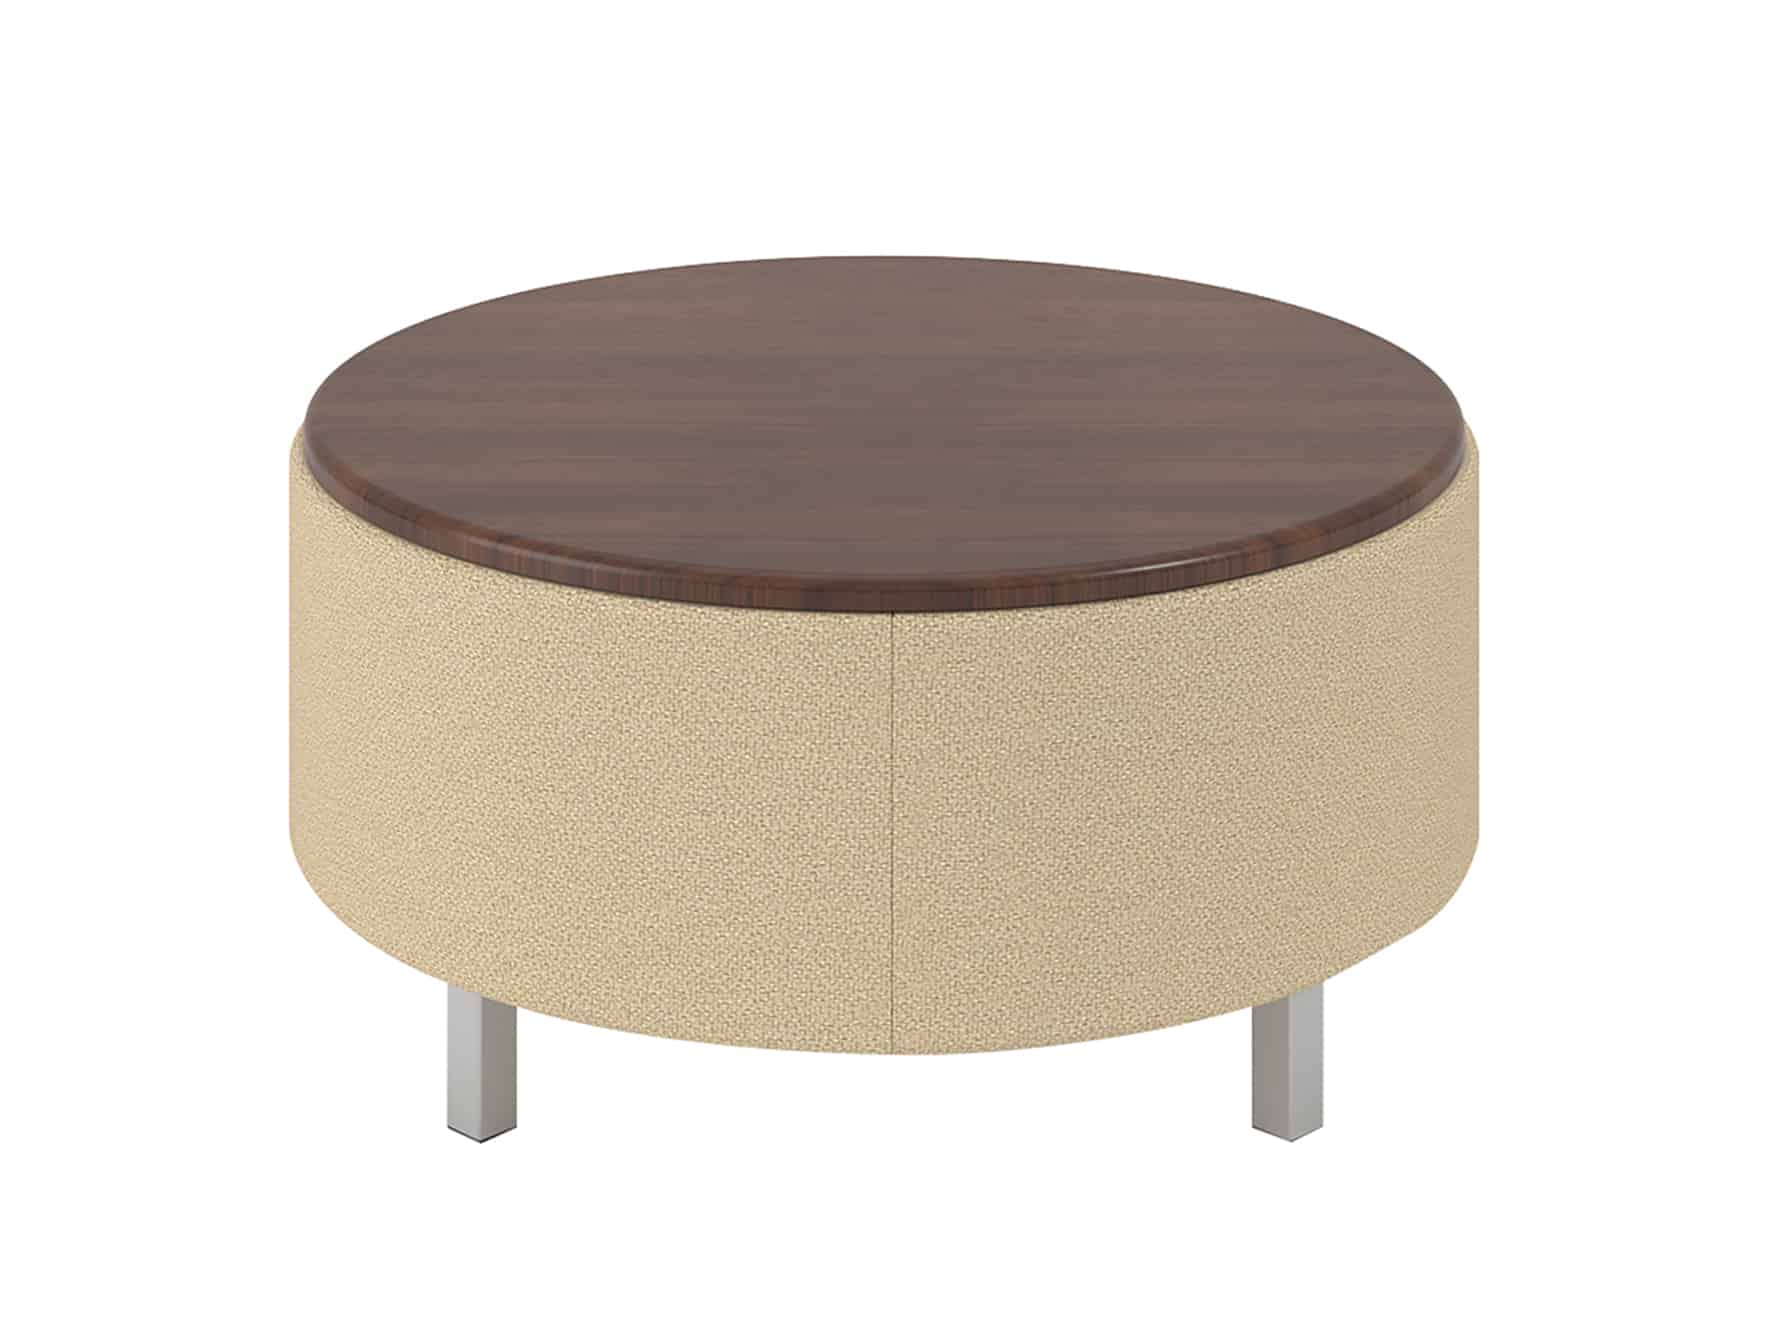 30" Round Ottoman, with Low Table Top, Square Metal Feet